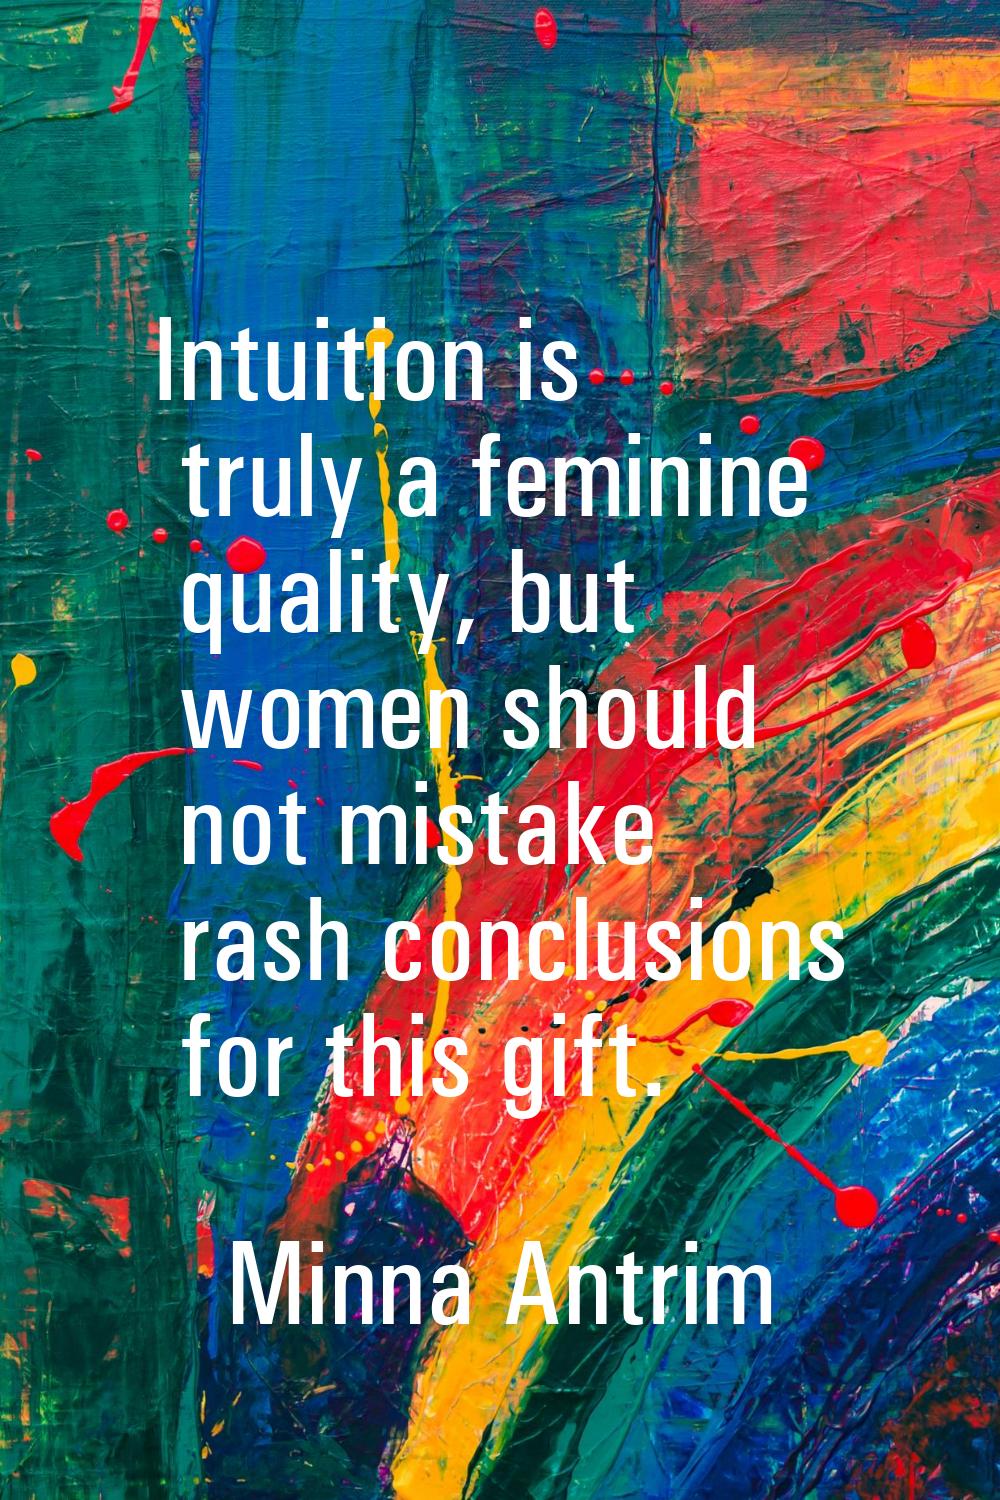 Intuition is truly a feminine quality, but women should not mistake rash conclusions for this gift.